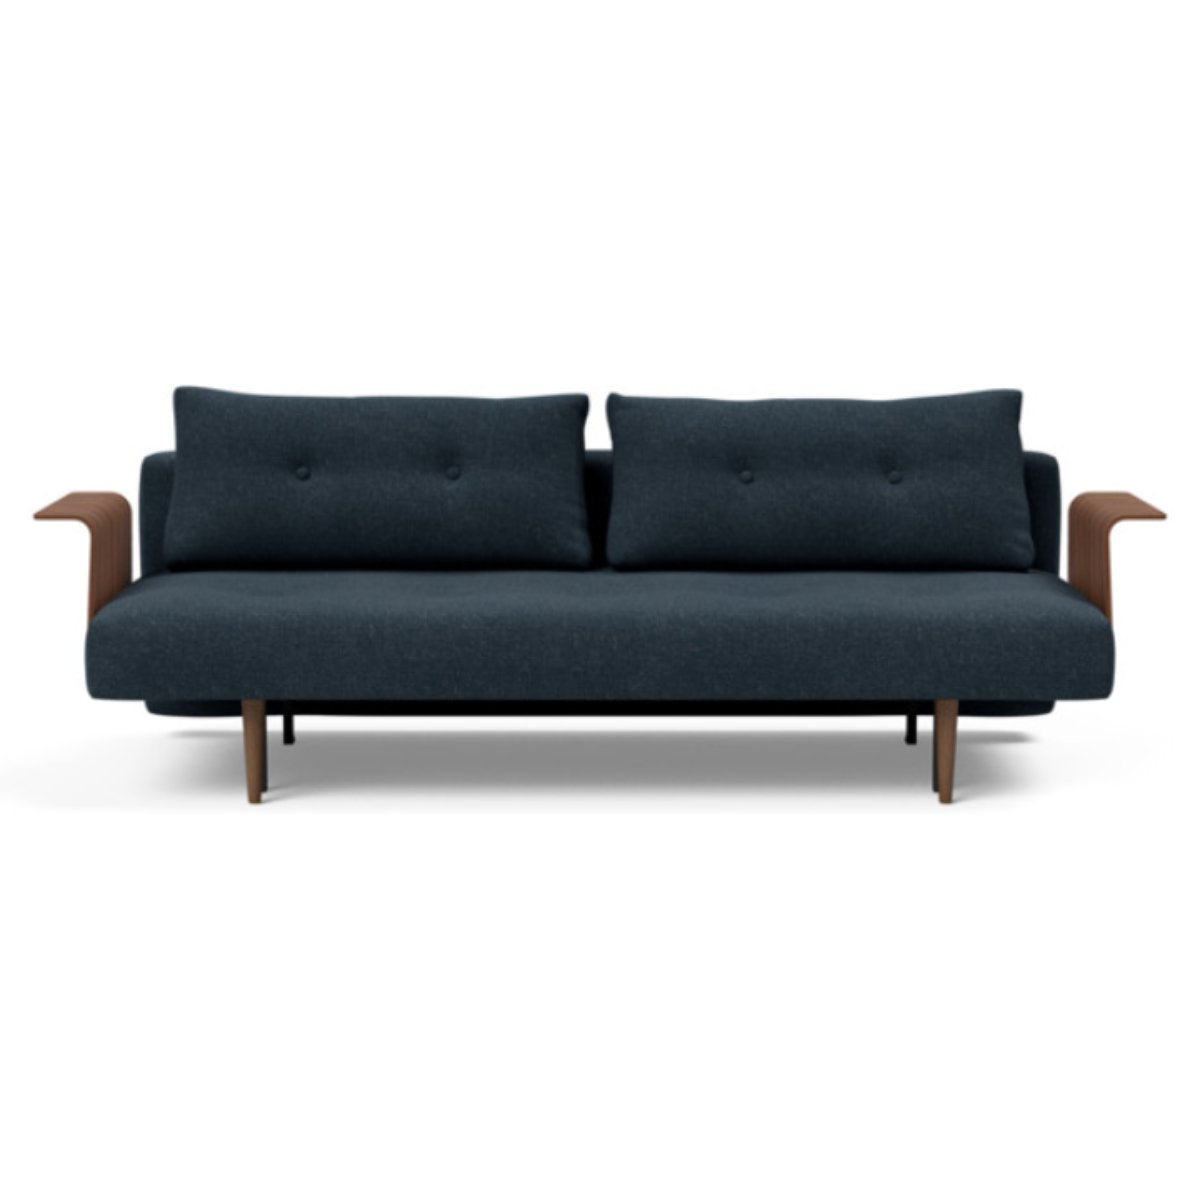 Load image into Gallery viewer, Recast Plus Sofa Bed Dark Styletto With Arms 515 Nist BlueDaybed INNOVATION  515 Nist Blue   Four Hands, Burke Decor, Mid Century Modern Furniture, Old Bones Furniture Company, Old Bones Co, Modern Mid Century, Designer Furniture, https://www.oldbonesco.com/
